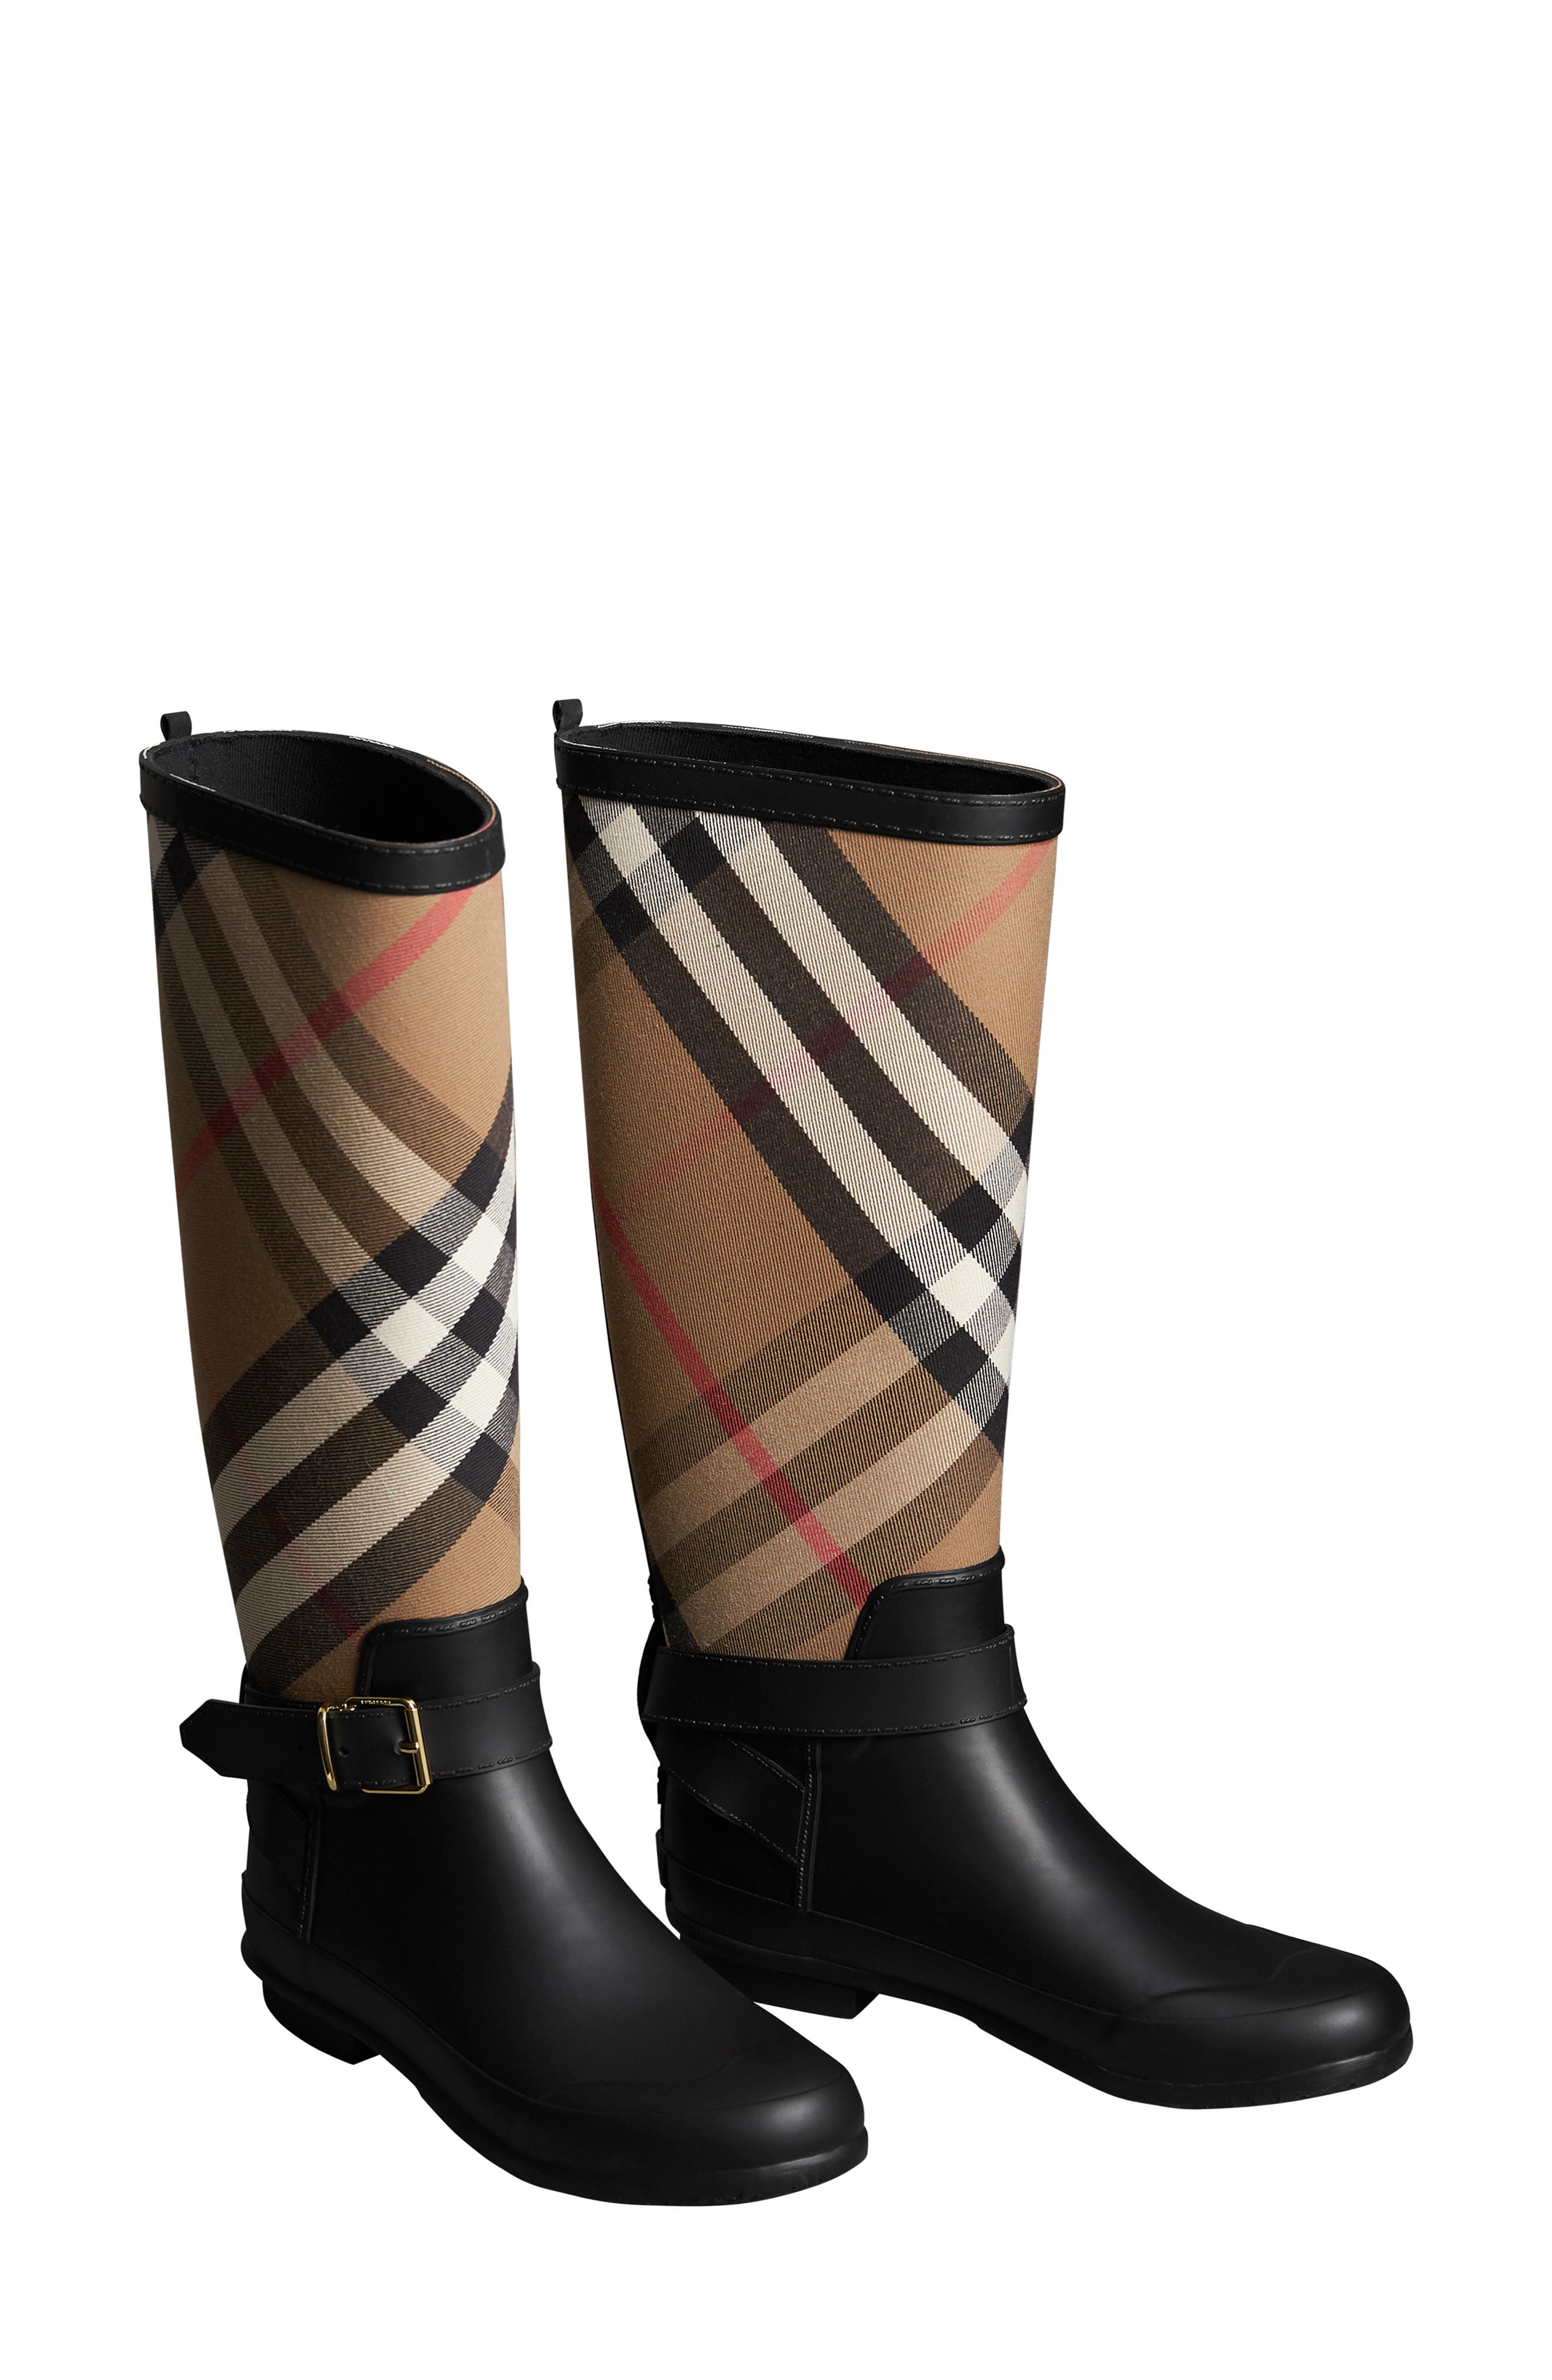 burberry boots gold